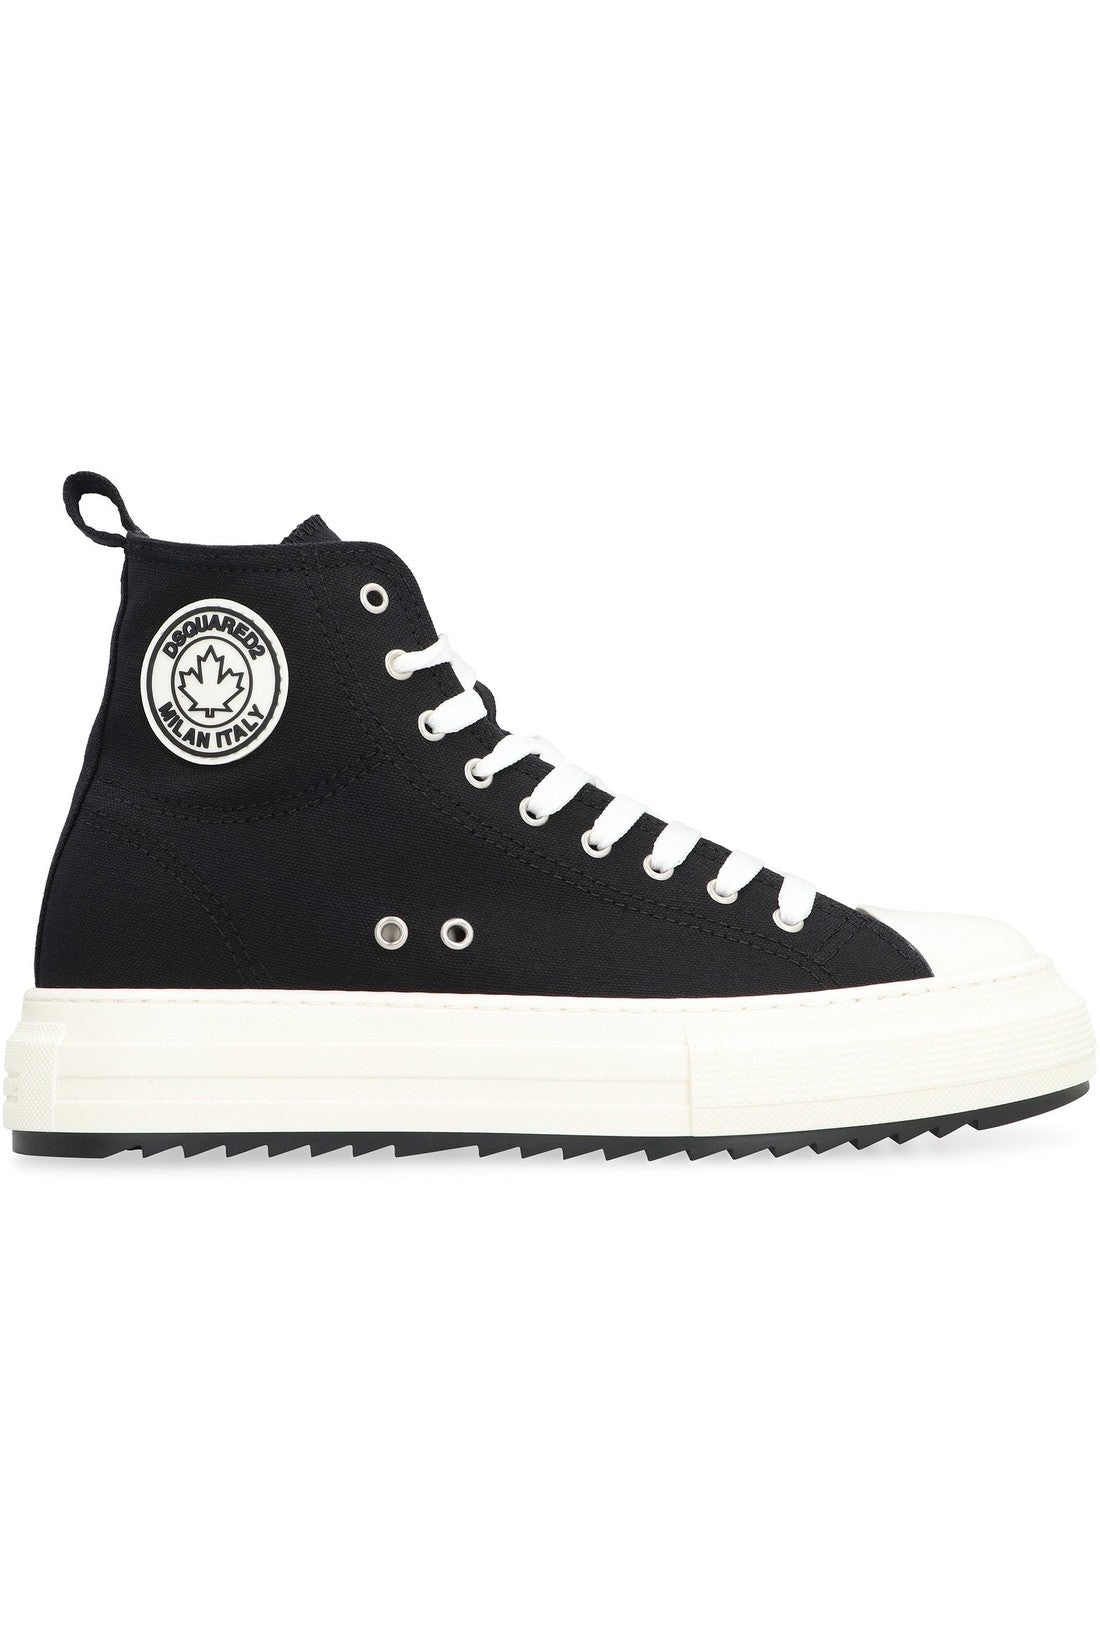 Dsquared2-OUTLET-SALE-Canvas high-top sneakers-ARCHIVIST